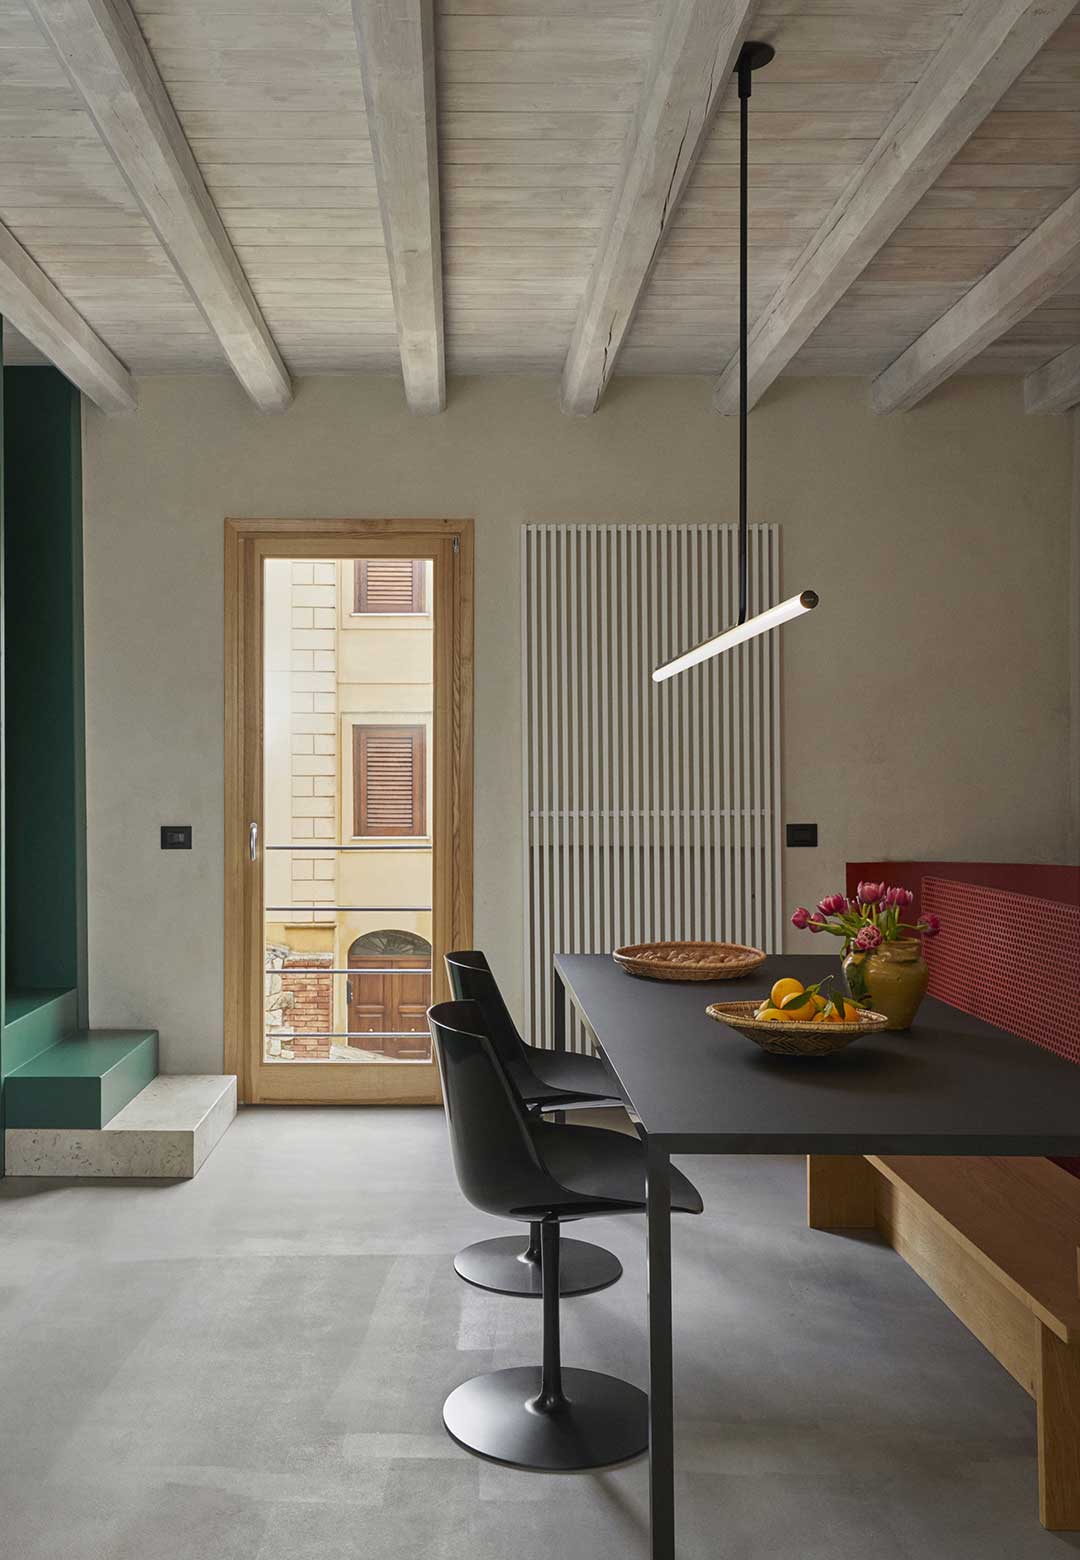 Airbnb revamps historic Sicilian home into a modern apartment